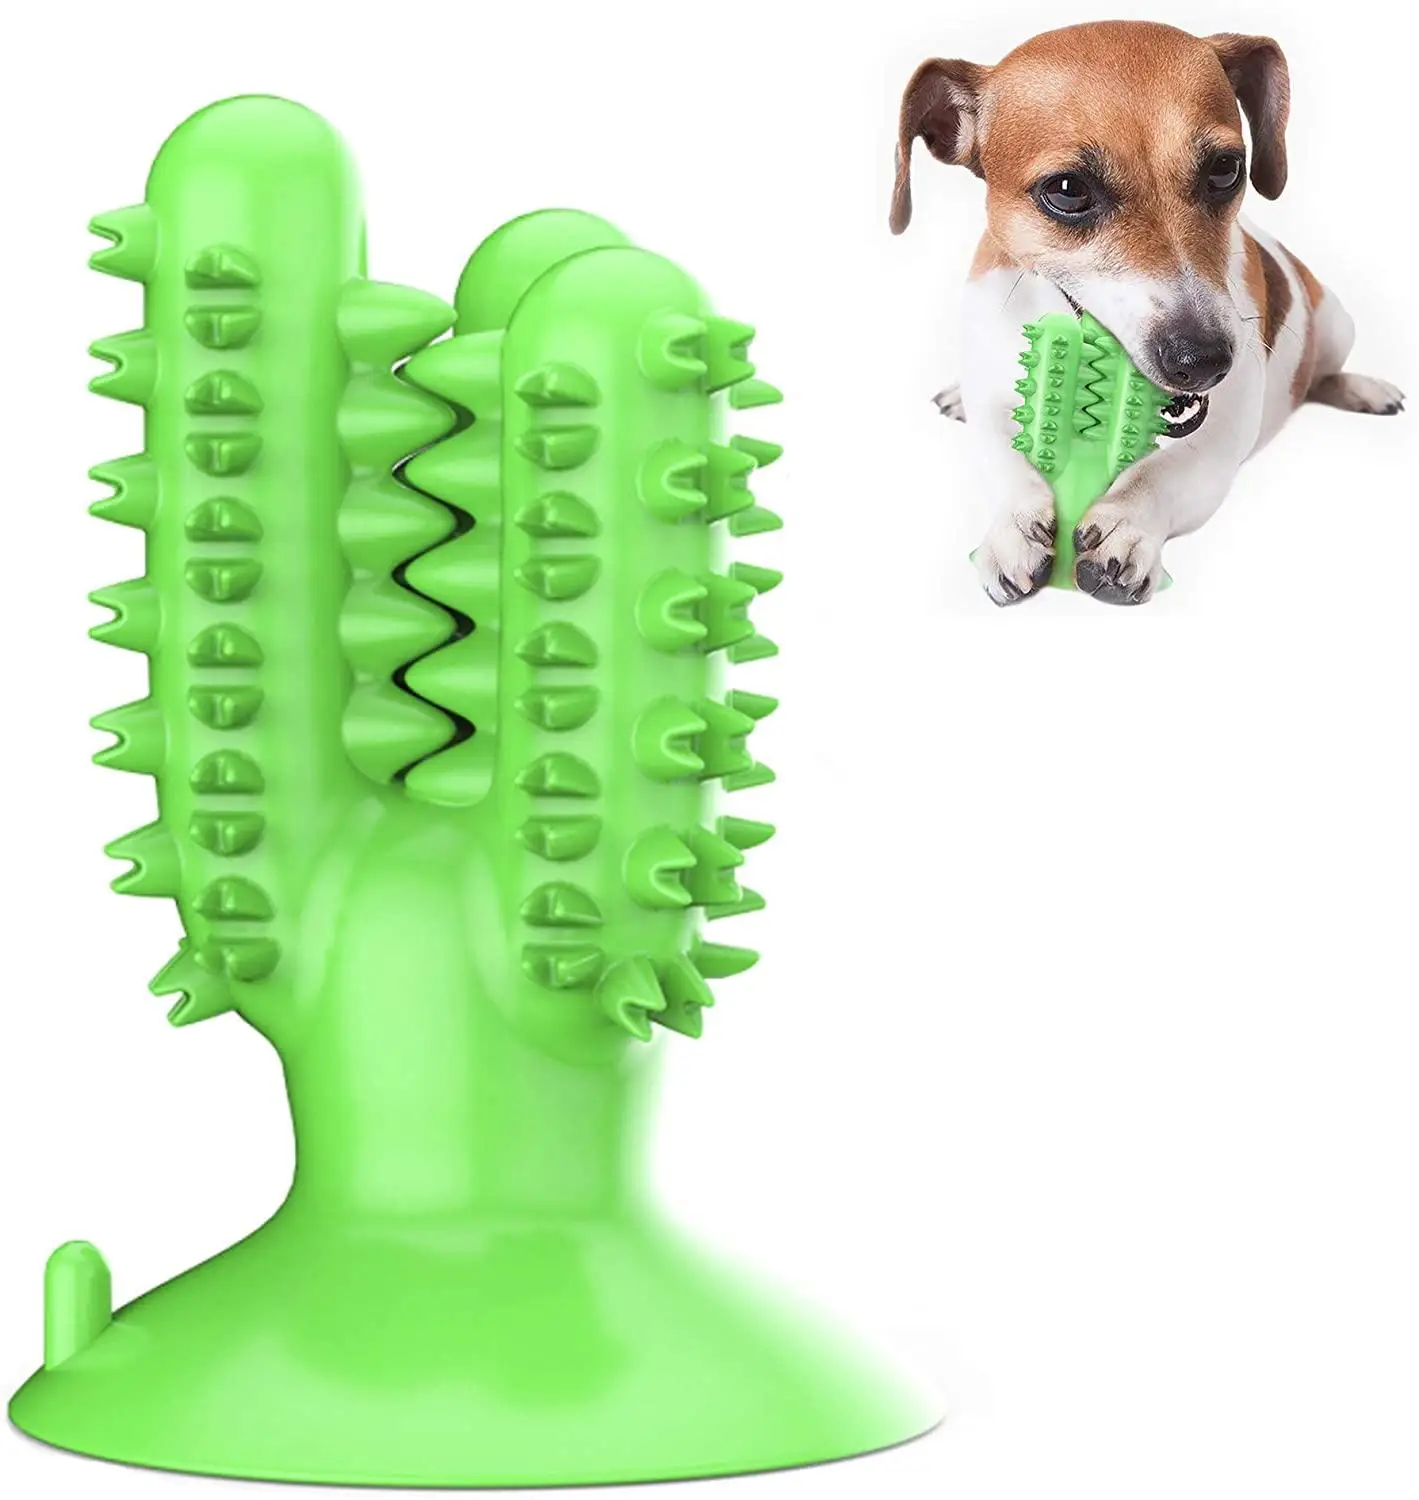 

Dog Chew Toothbrush Teeth Cleaning Toys Puppy Oral Care Molar Stick for Pet Gift for Small/Medium/Large Dogs Bite Resistant